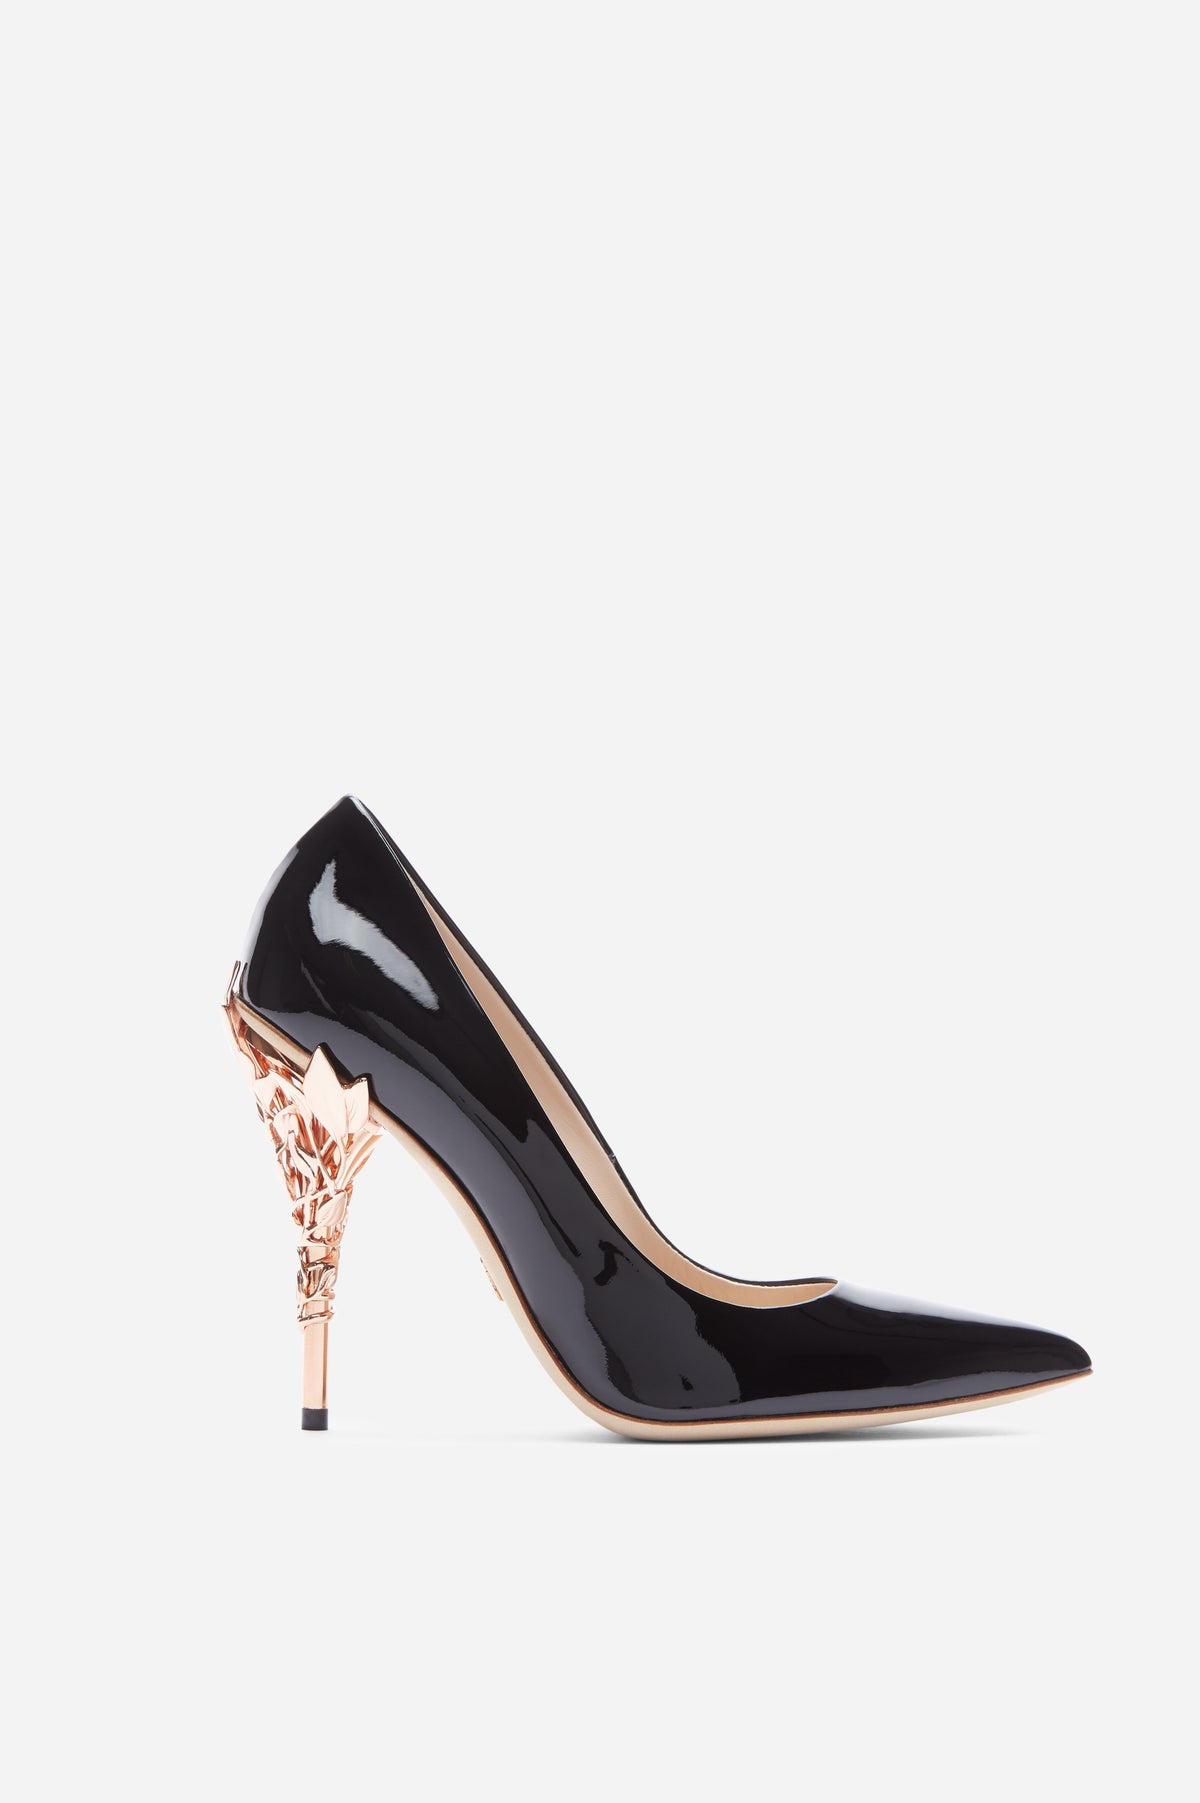 Black Patent Leather Eden Heels with Rose Gold Leaves